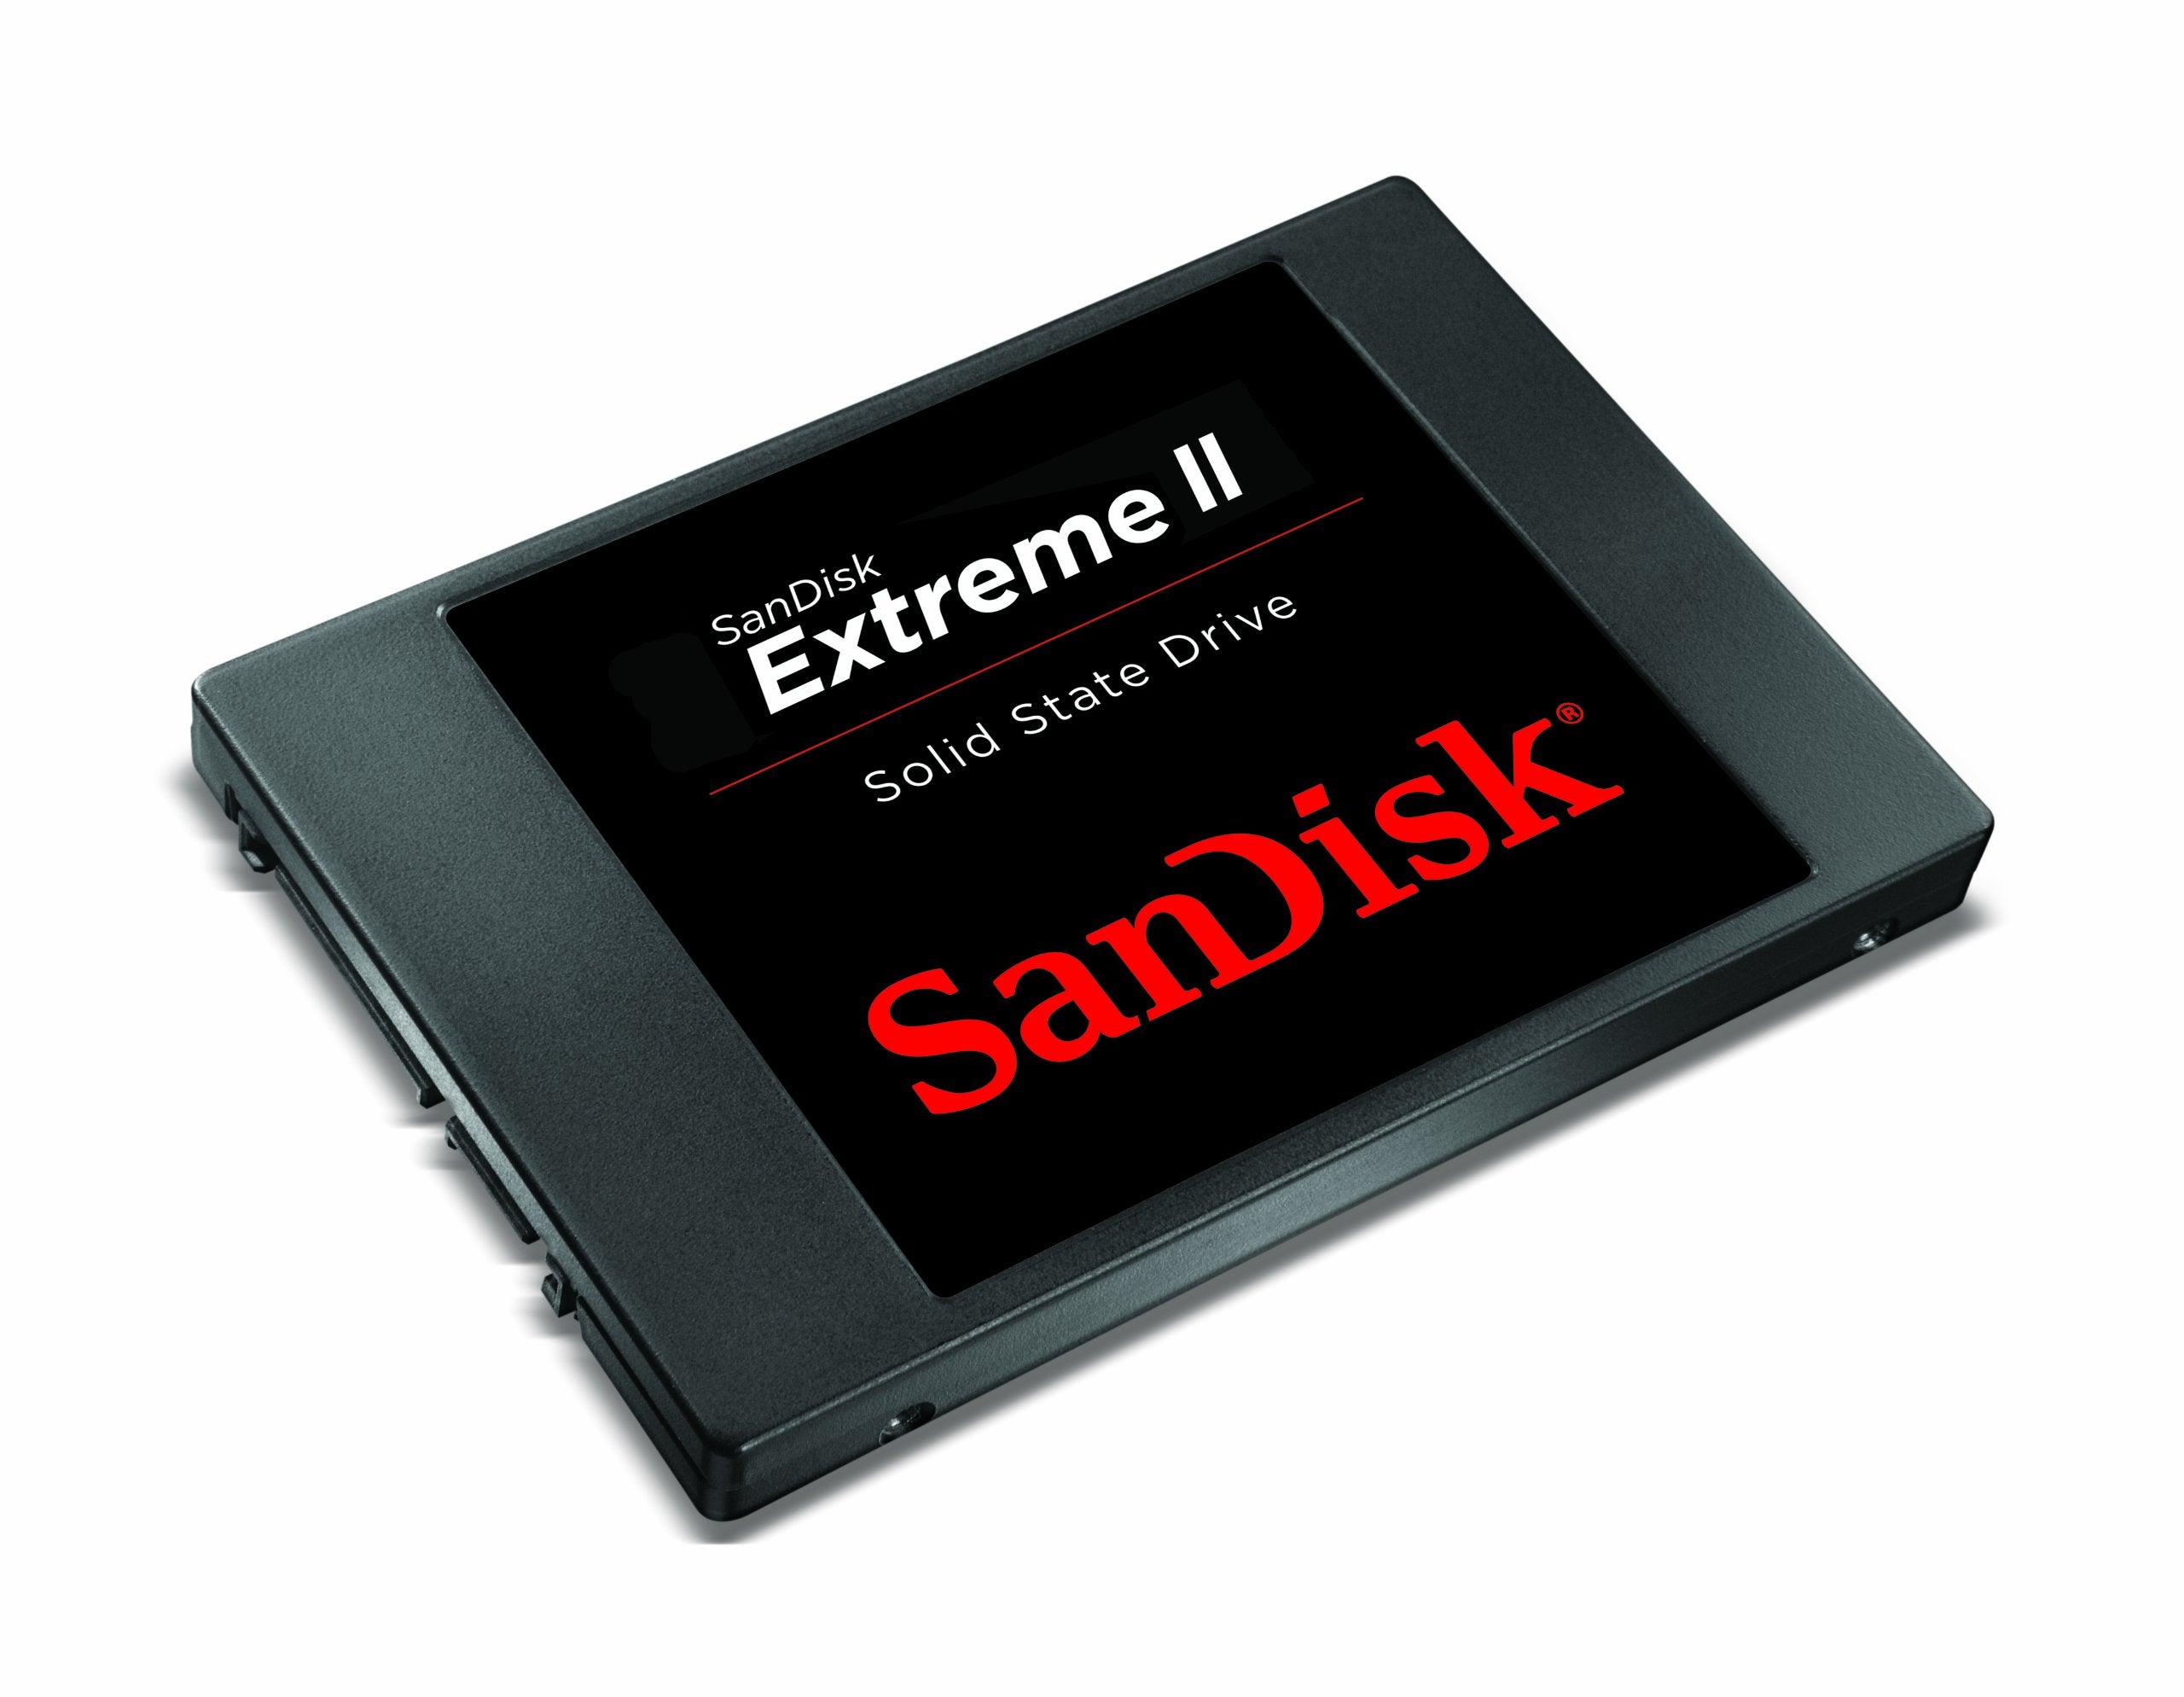 SanDisk Extreme II 240GB SATA 6.0GB/s 2.5-Inch 7mm Height Solid State Drive (SSD) With Read Up To 550MB/s & Up To 95K IOPS- SDSSDXP-240G-G25